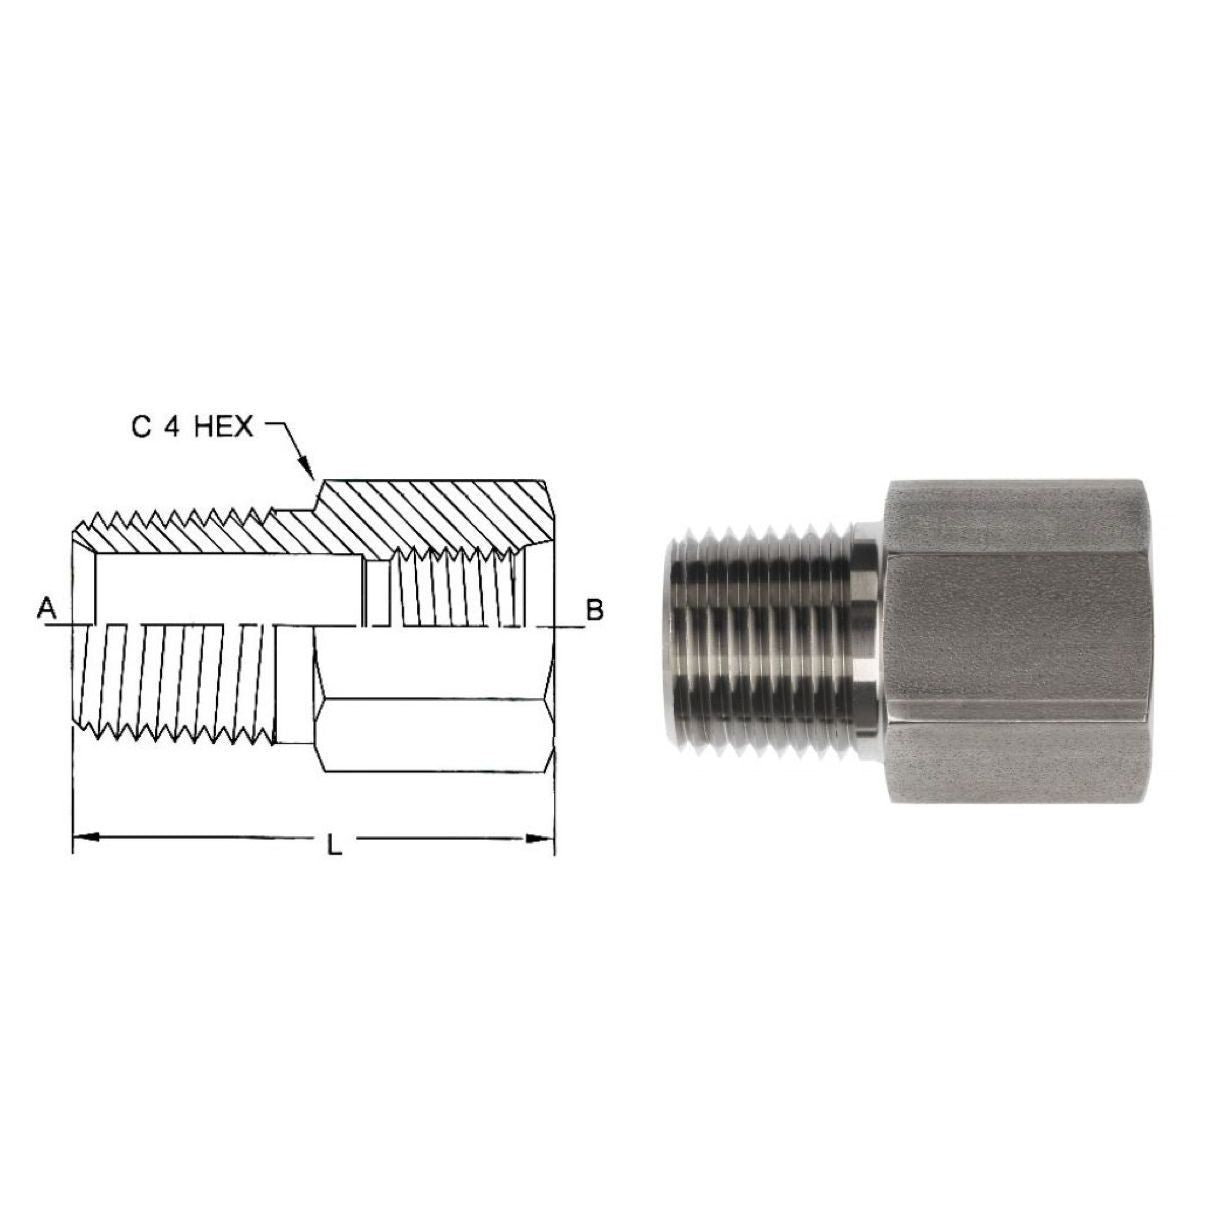 6404-12-08 : OneHydraulics Adapter, Straight, 0.75 (3/4") Female ORB x 0.5 (1/2") Male, Steel, 6000psi